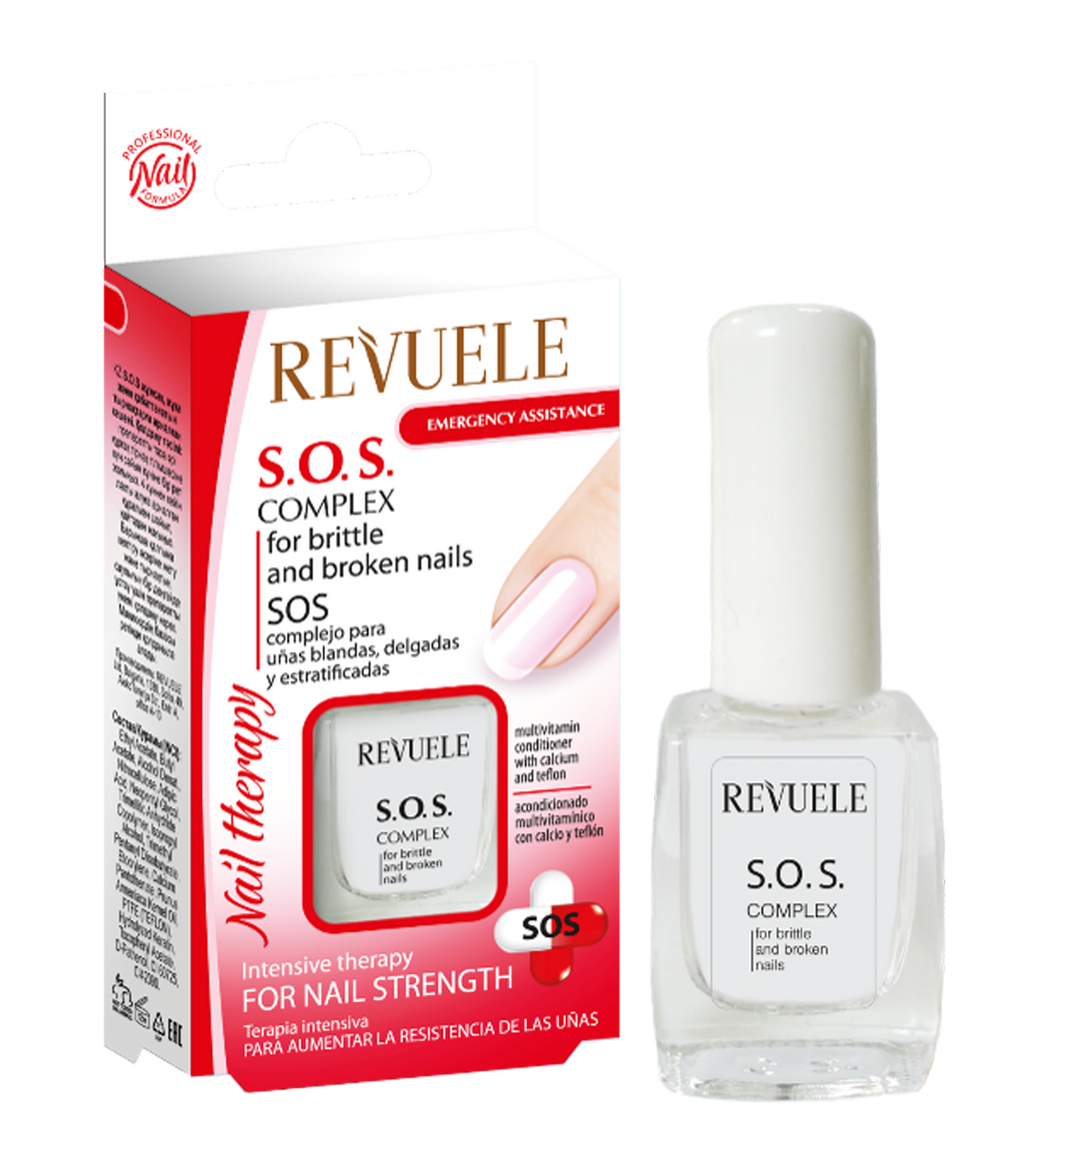 Revuele Nail Therapy S.O.S Complex for Brittle & Broken Nails 10ml